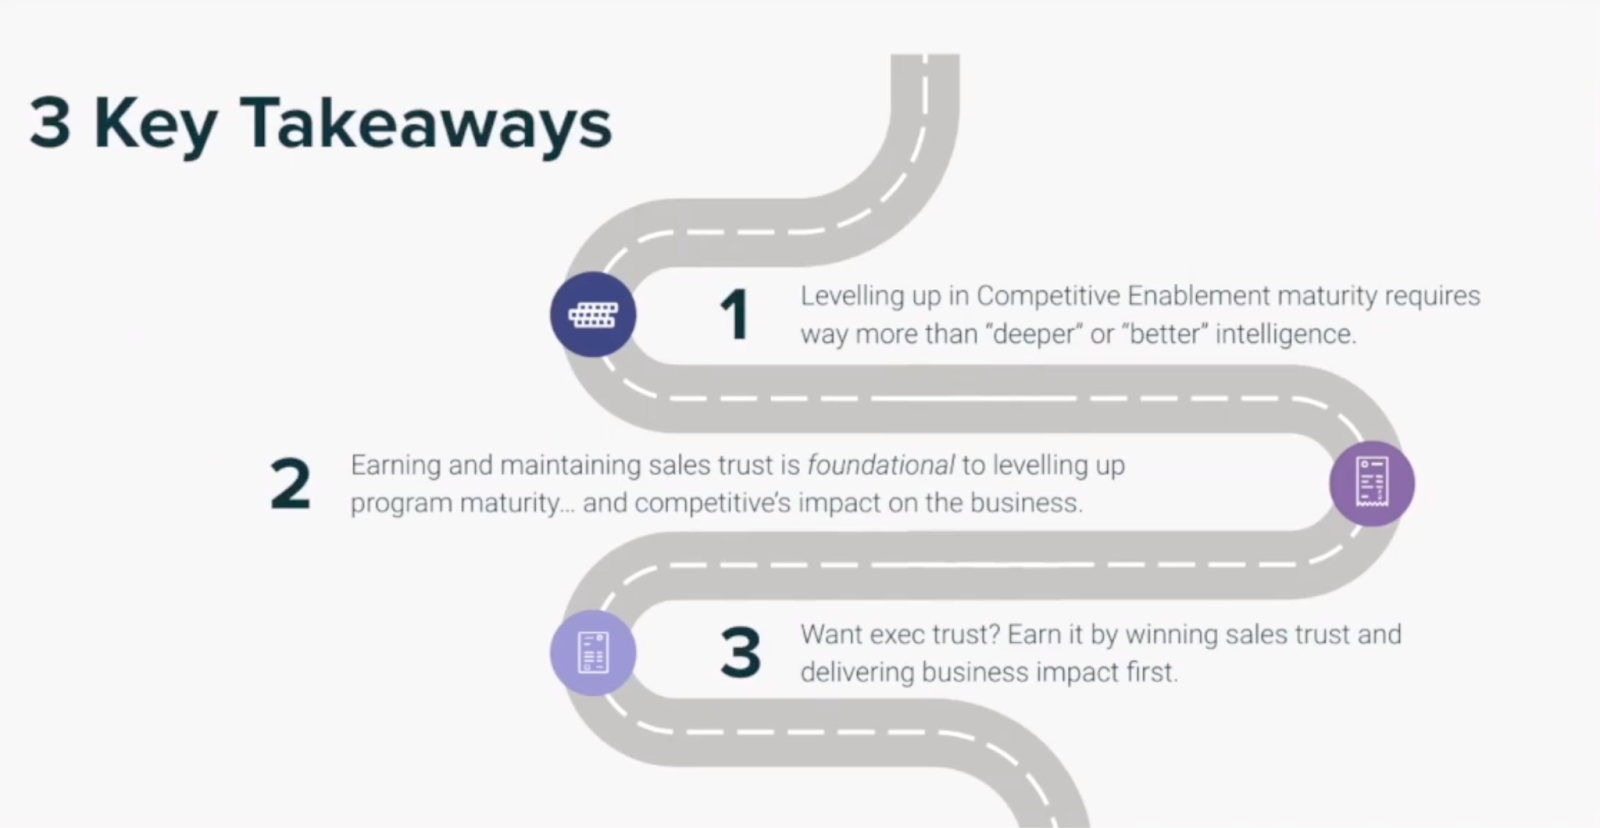 3 Key Takeaways – 1: Levelling up in Competitive Enablement maturity requires way more than "deeper" or "better" intelligence. 2: Earning and maintaining sales trust is foundational to levelling up program maturity... and competitive's impact on the business. 3: Want exec trust? Earn it by winning sales trust and delivering business impact first.